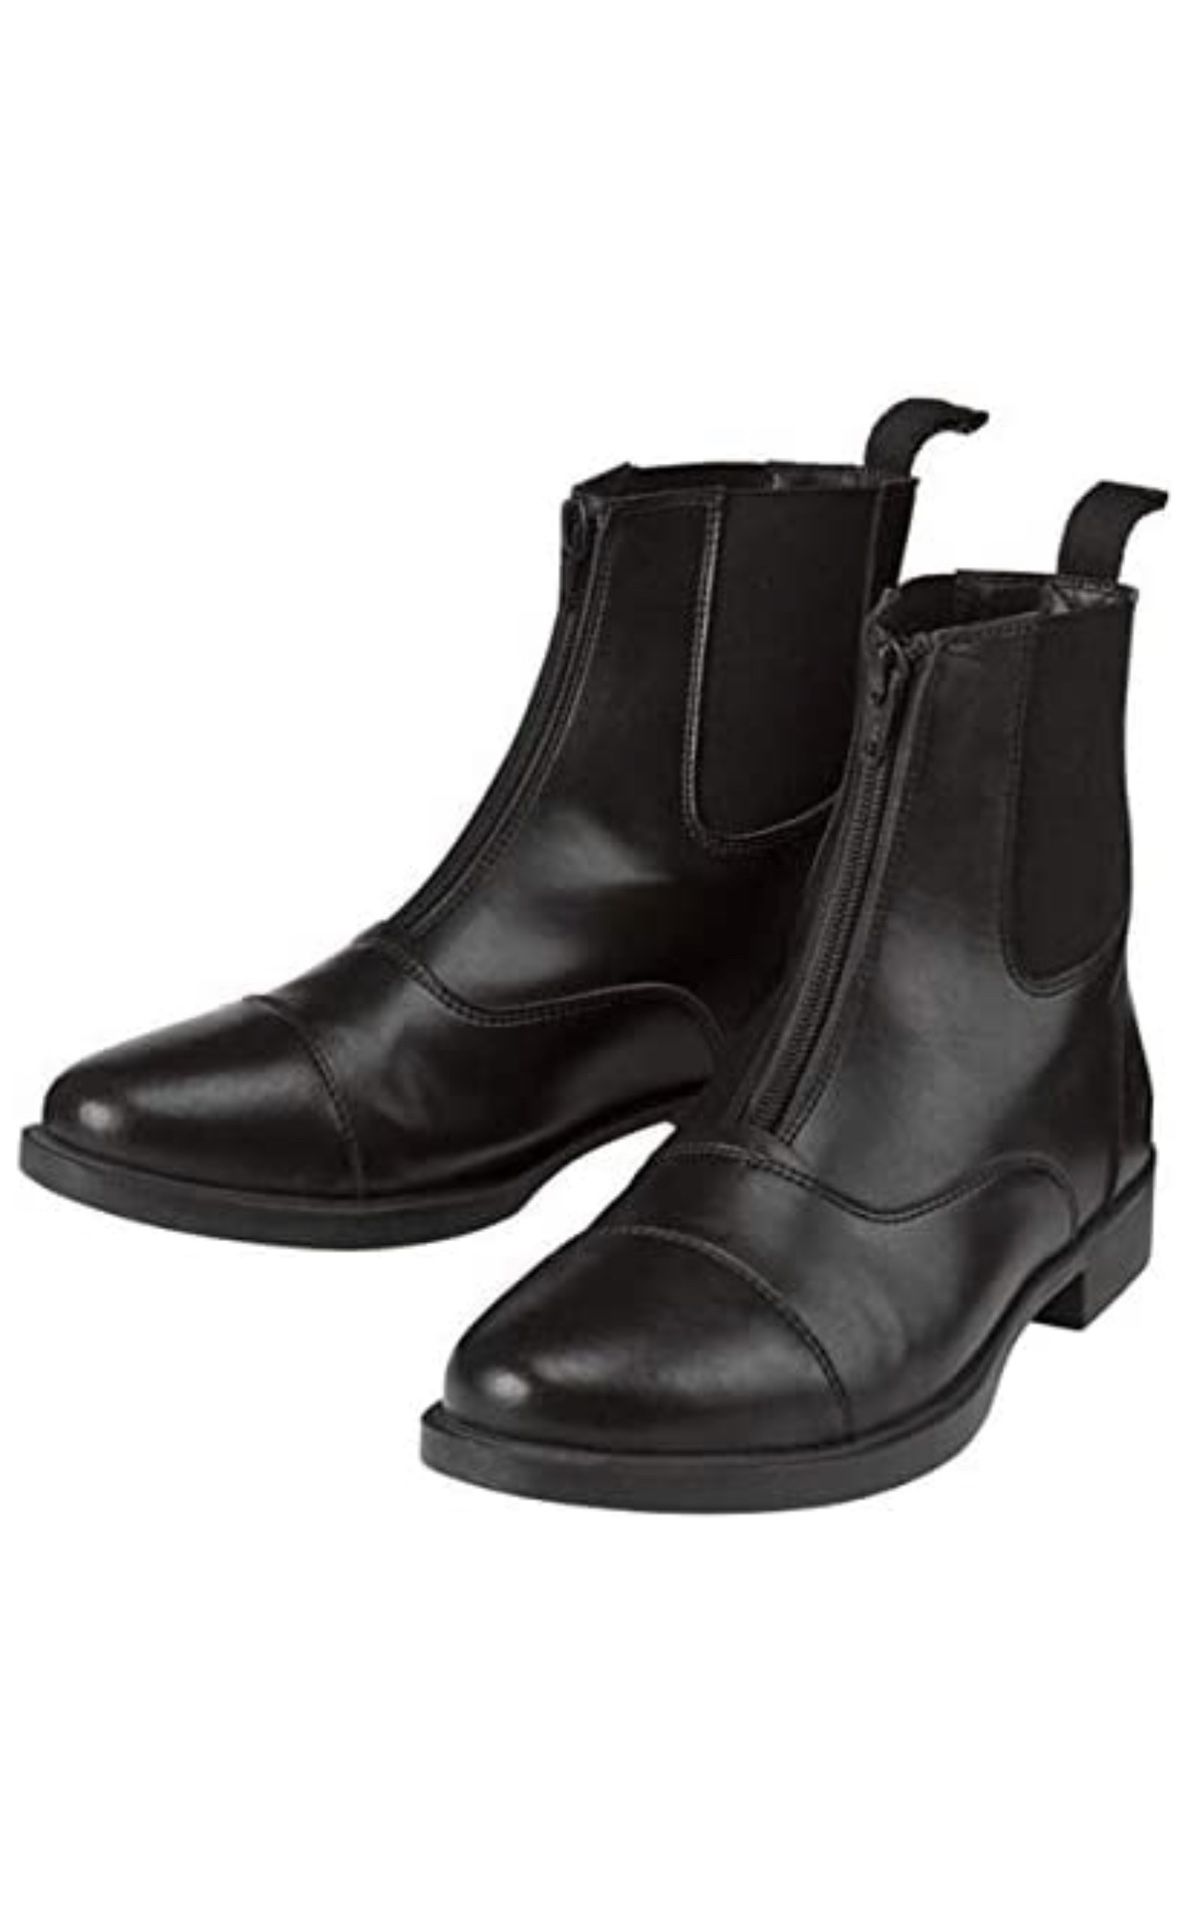 Equine riding (short ankle) black boots